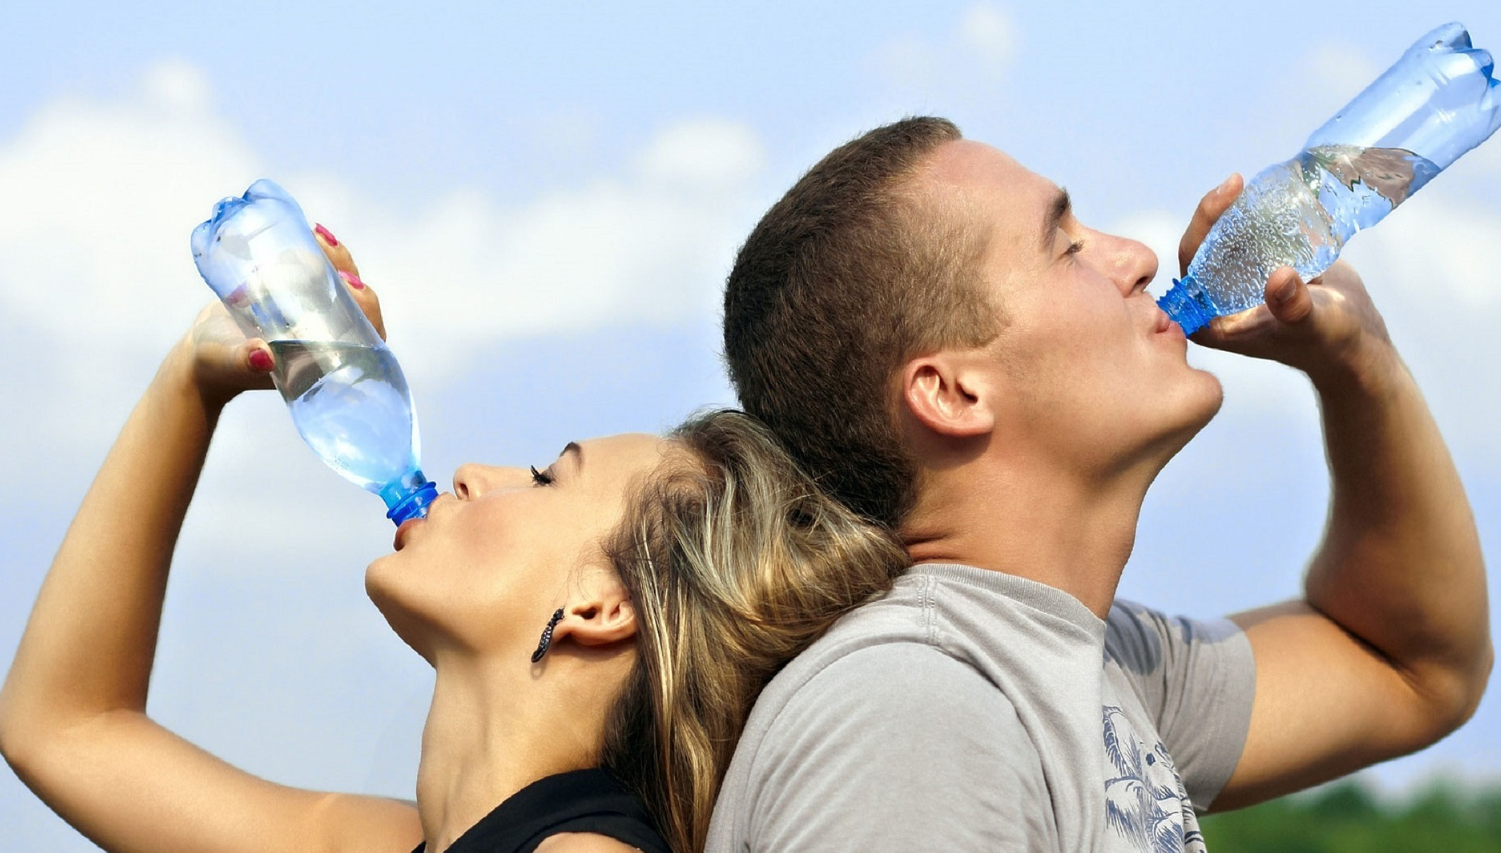 Over Hydration: If you are drinking too much water, stop it, it will cause harm instead of benefit